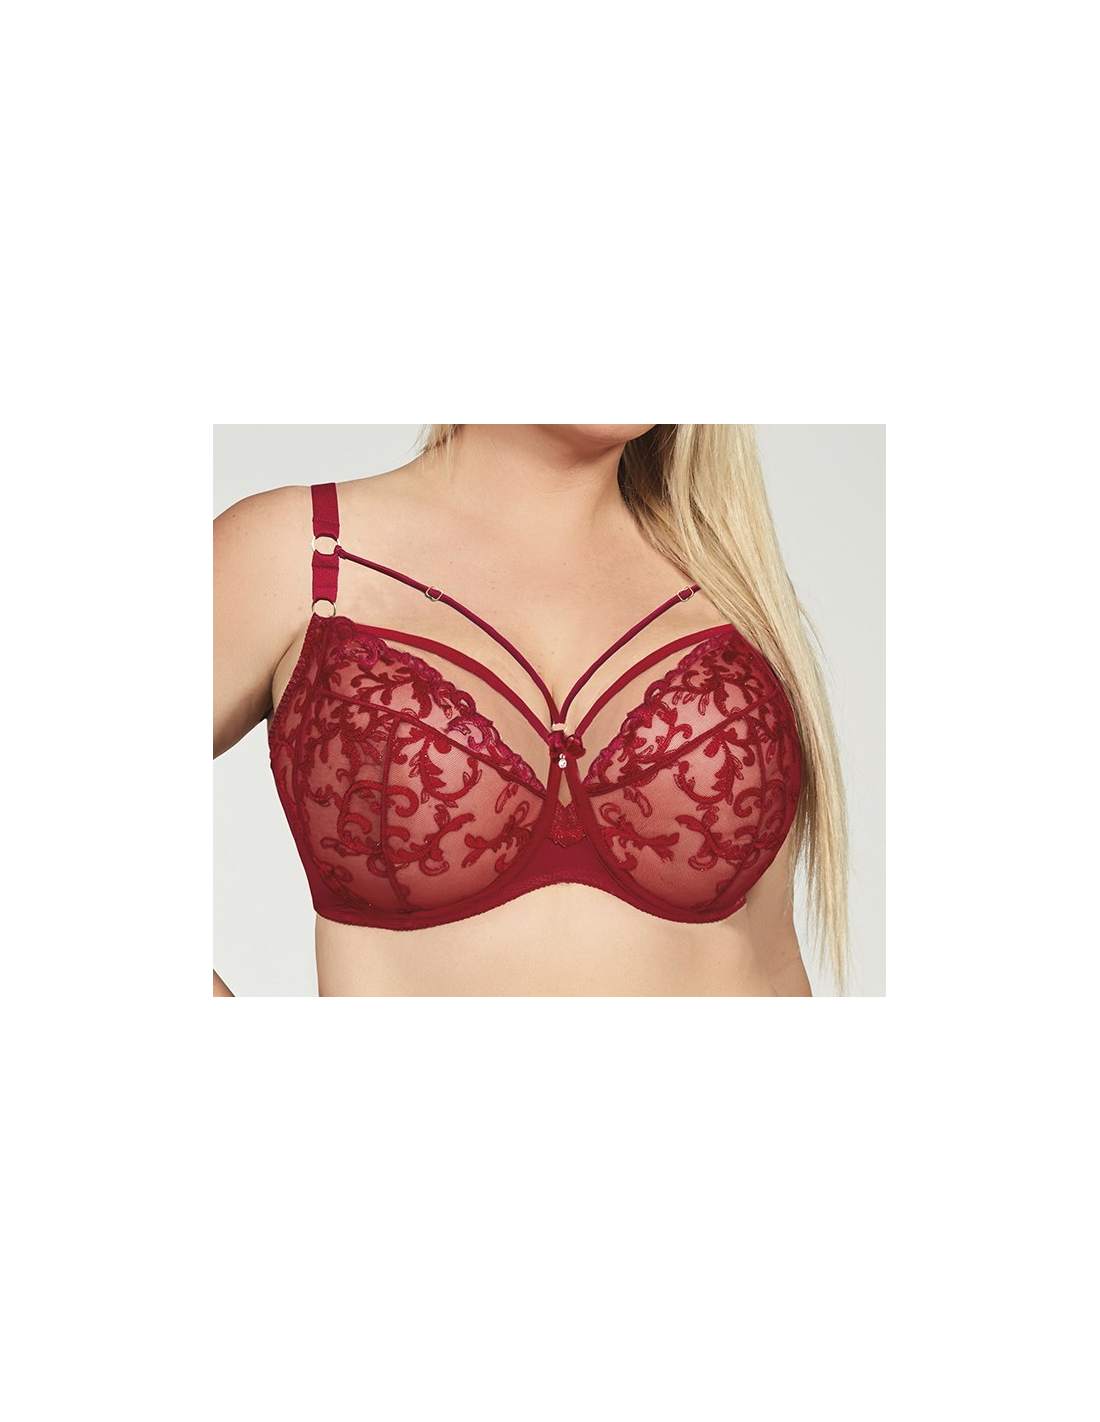 Plus Size Bra Half Cup with Lace and Tulle Details - Krisline SUNSHINE